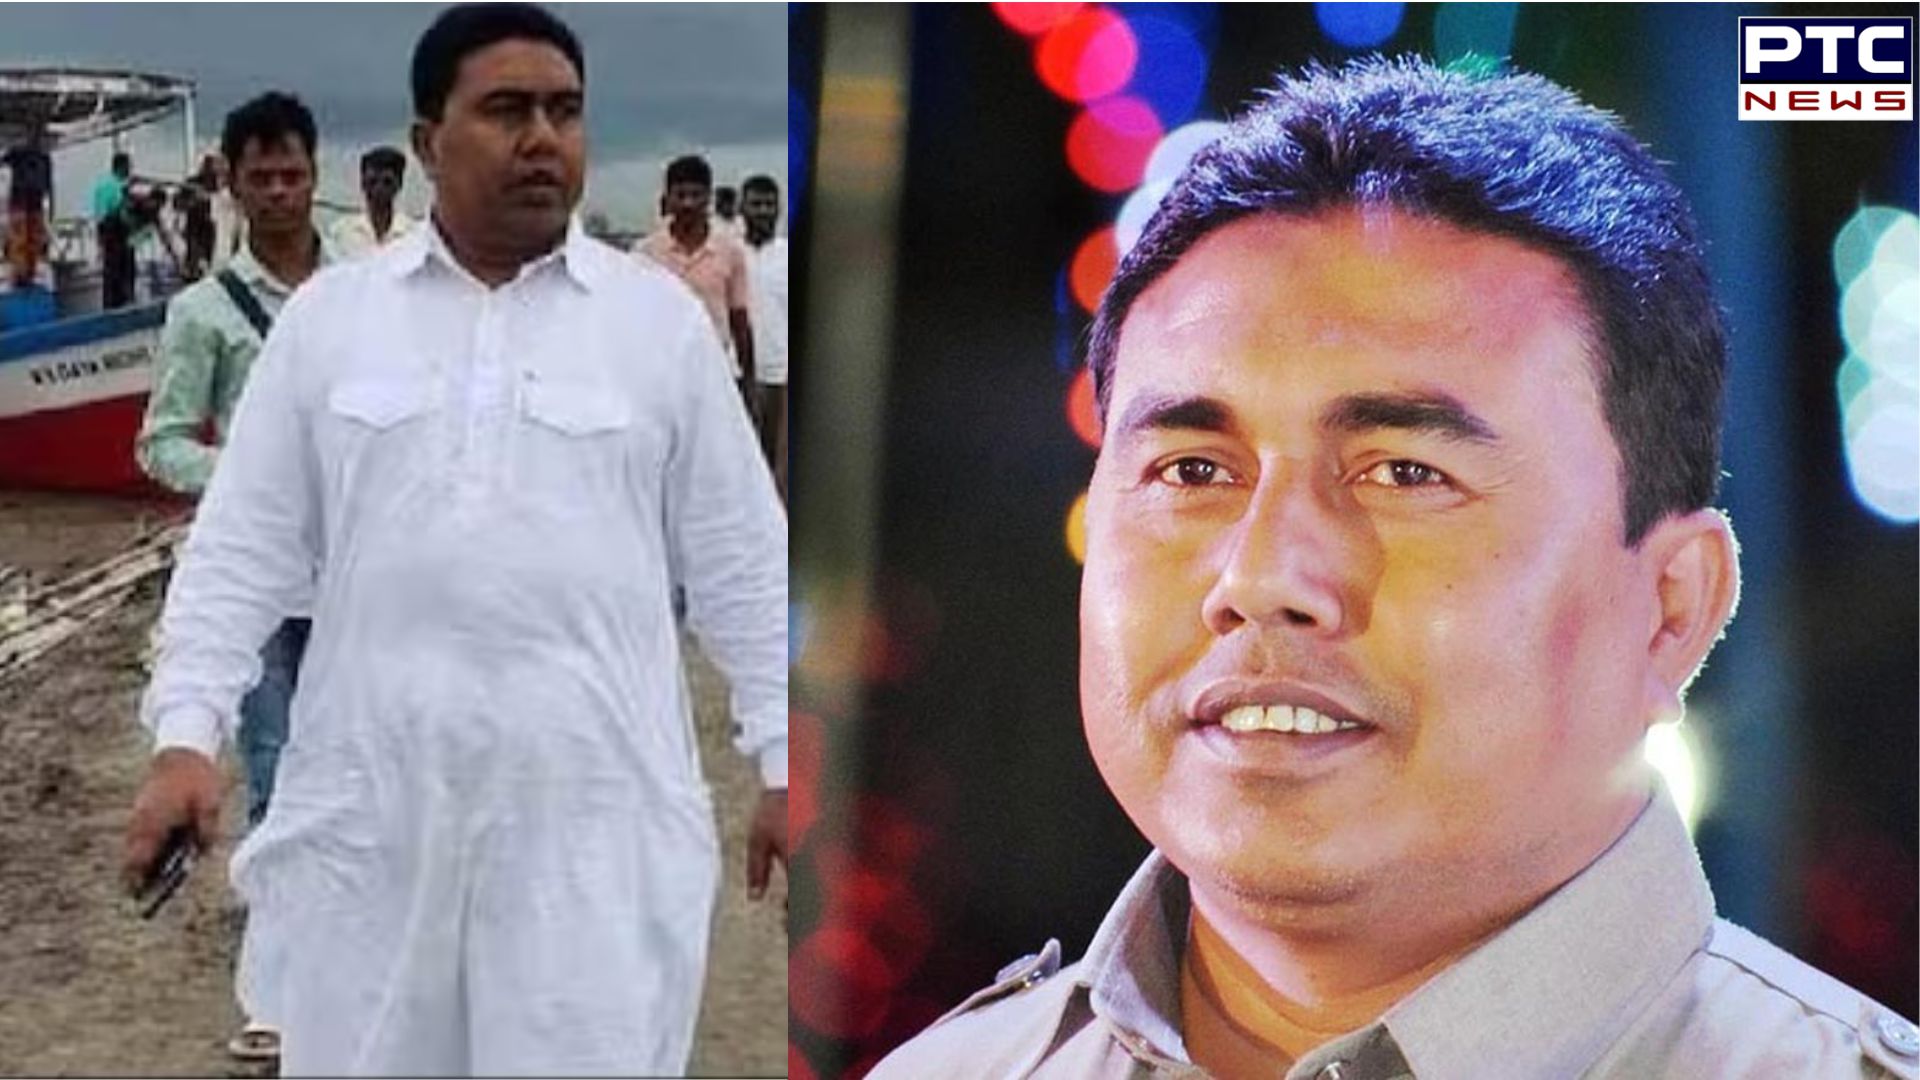 Trinamool Congress leader Sheikh Shahjahan held after 55 days on the run amidst allegations of sexual violence, land grab